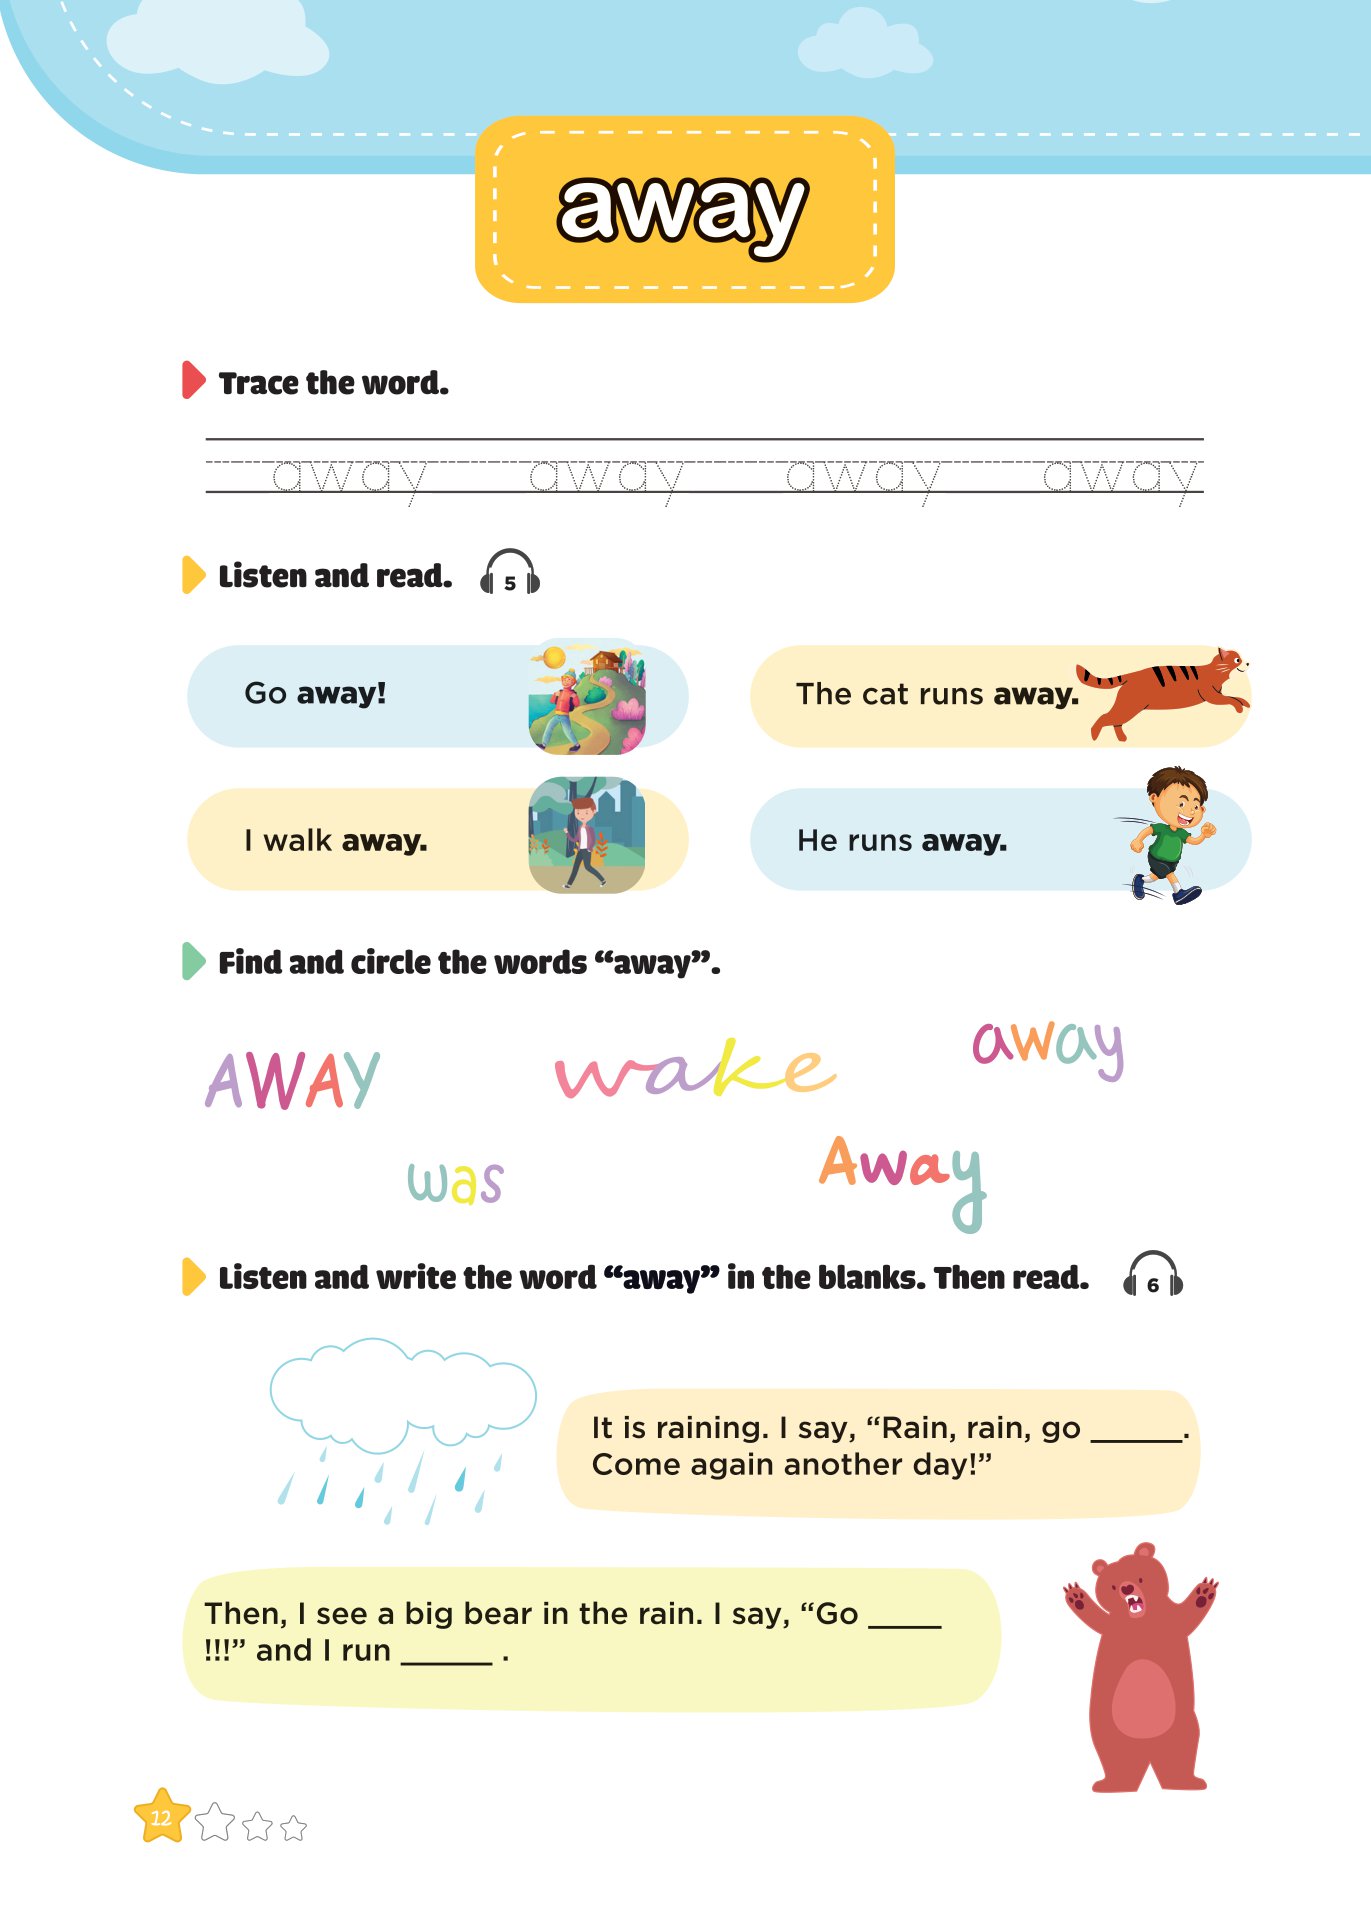 300 First Sight Words For Kids - 1 PDF